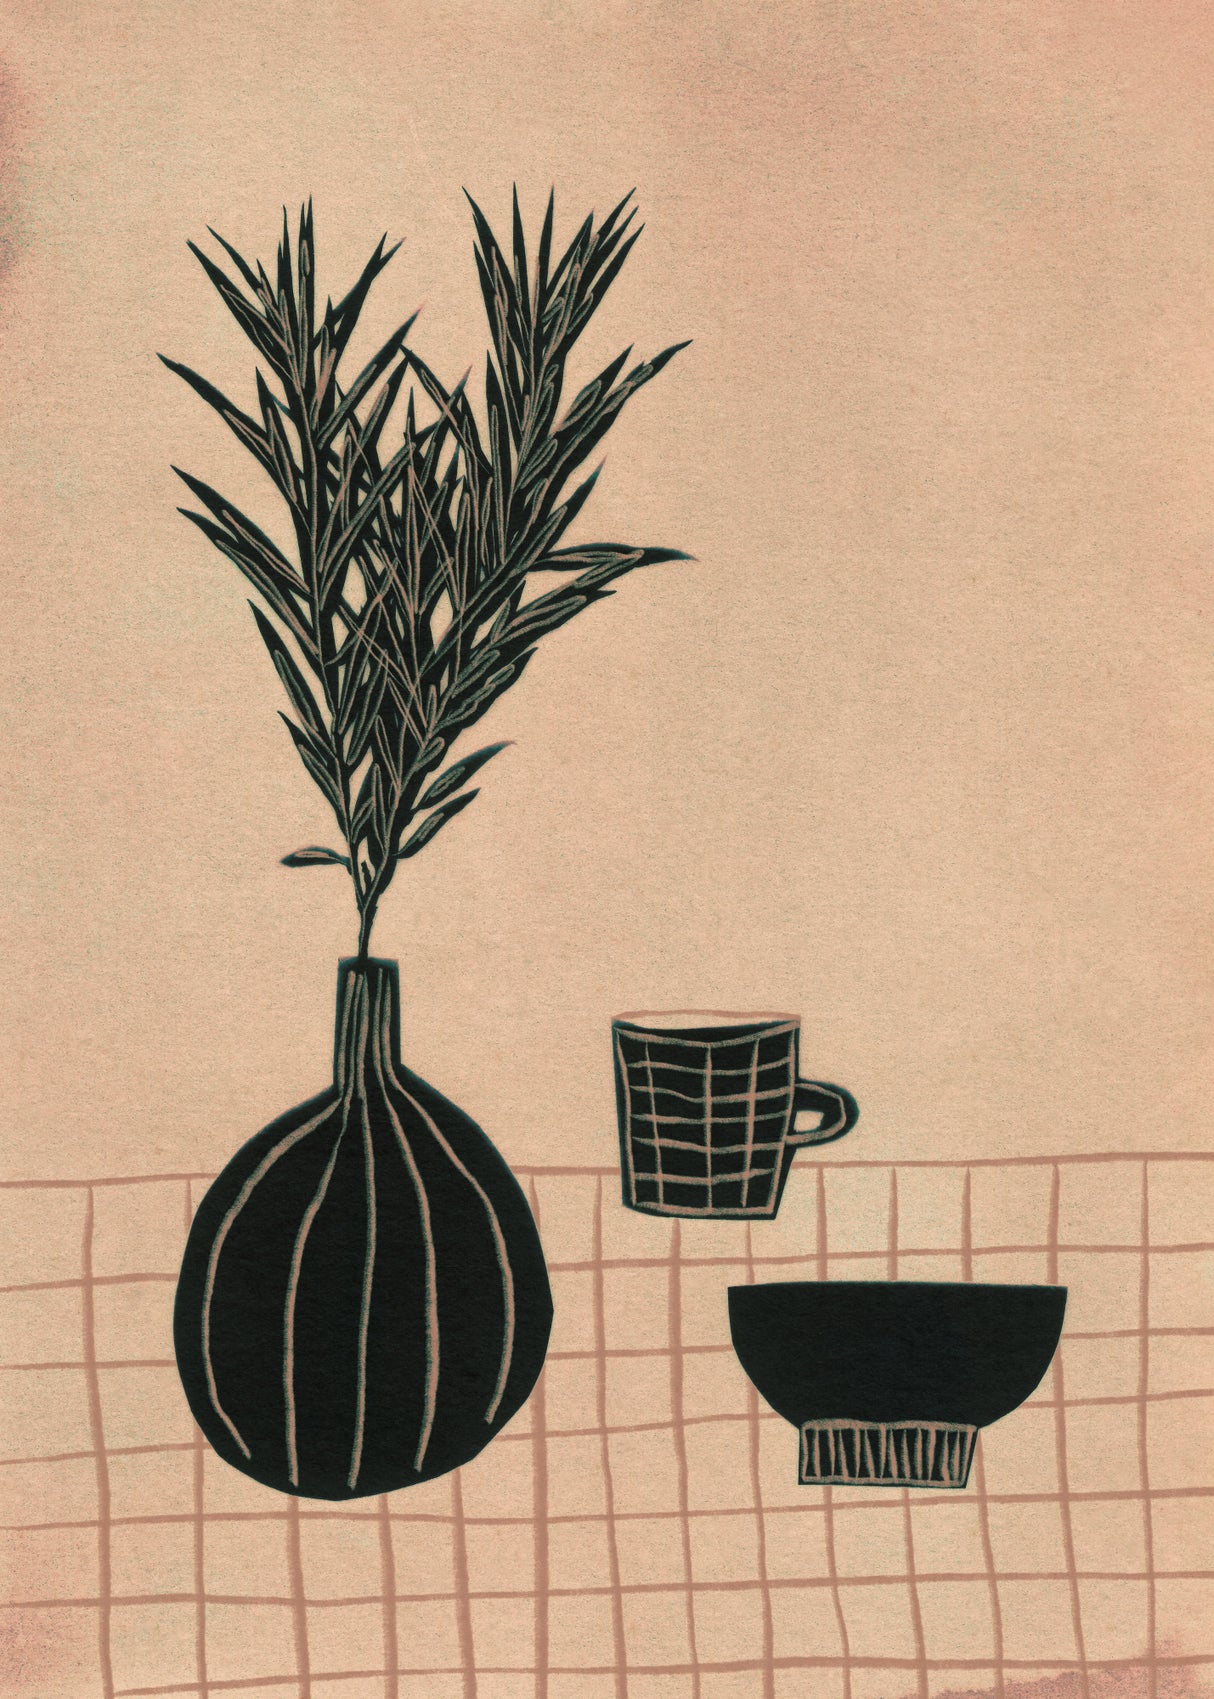 Still Life With a Vase, Bowl, and a Cup of Tea Poster och Canvastavla